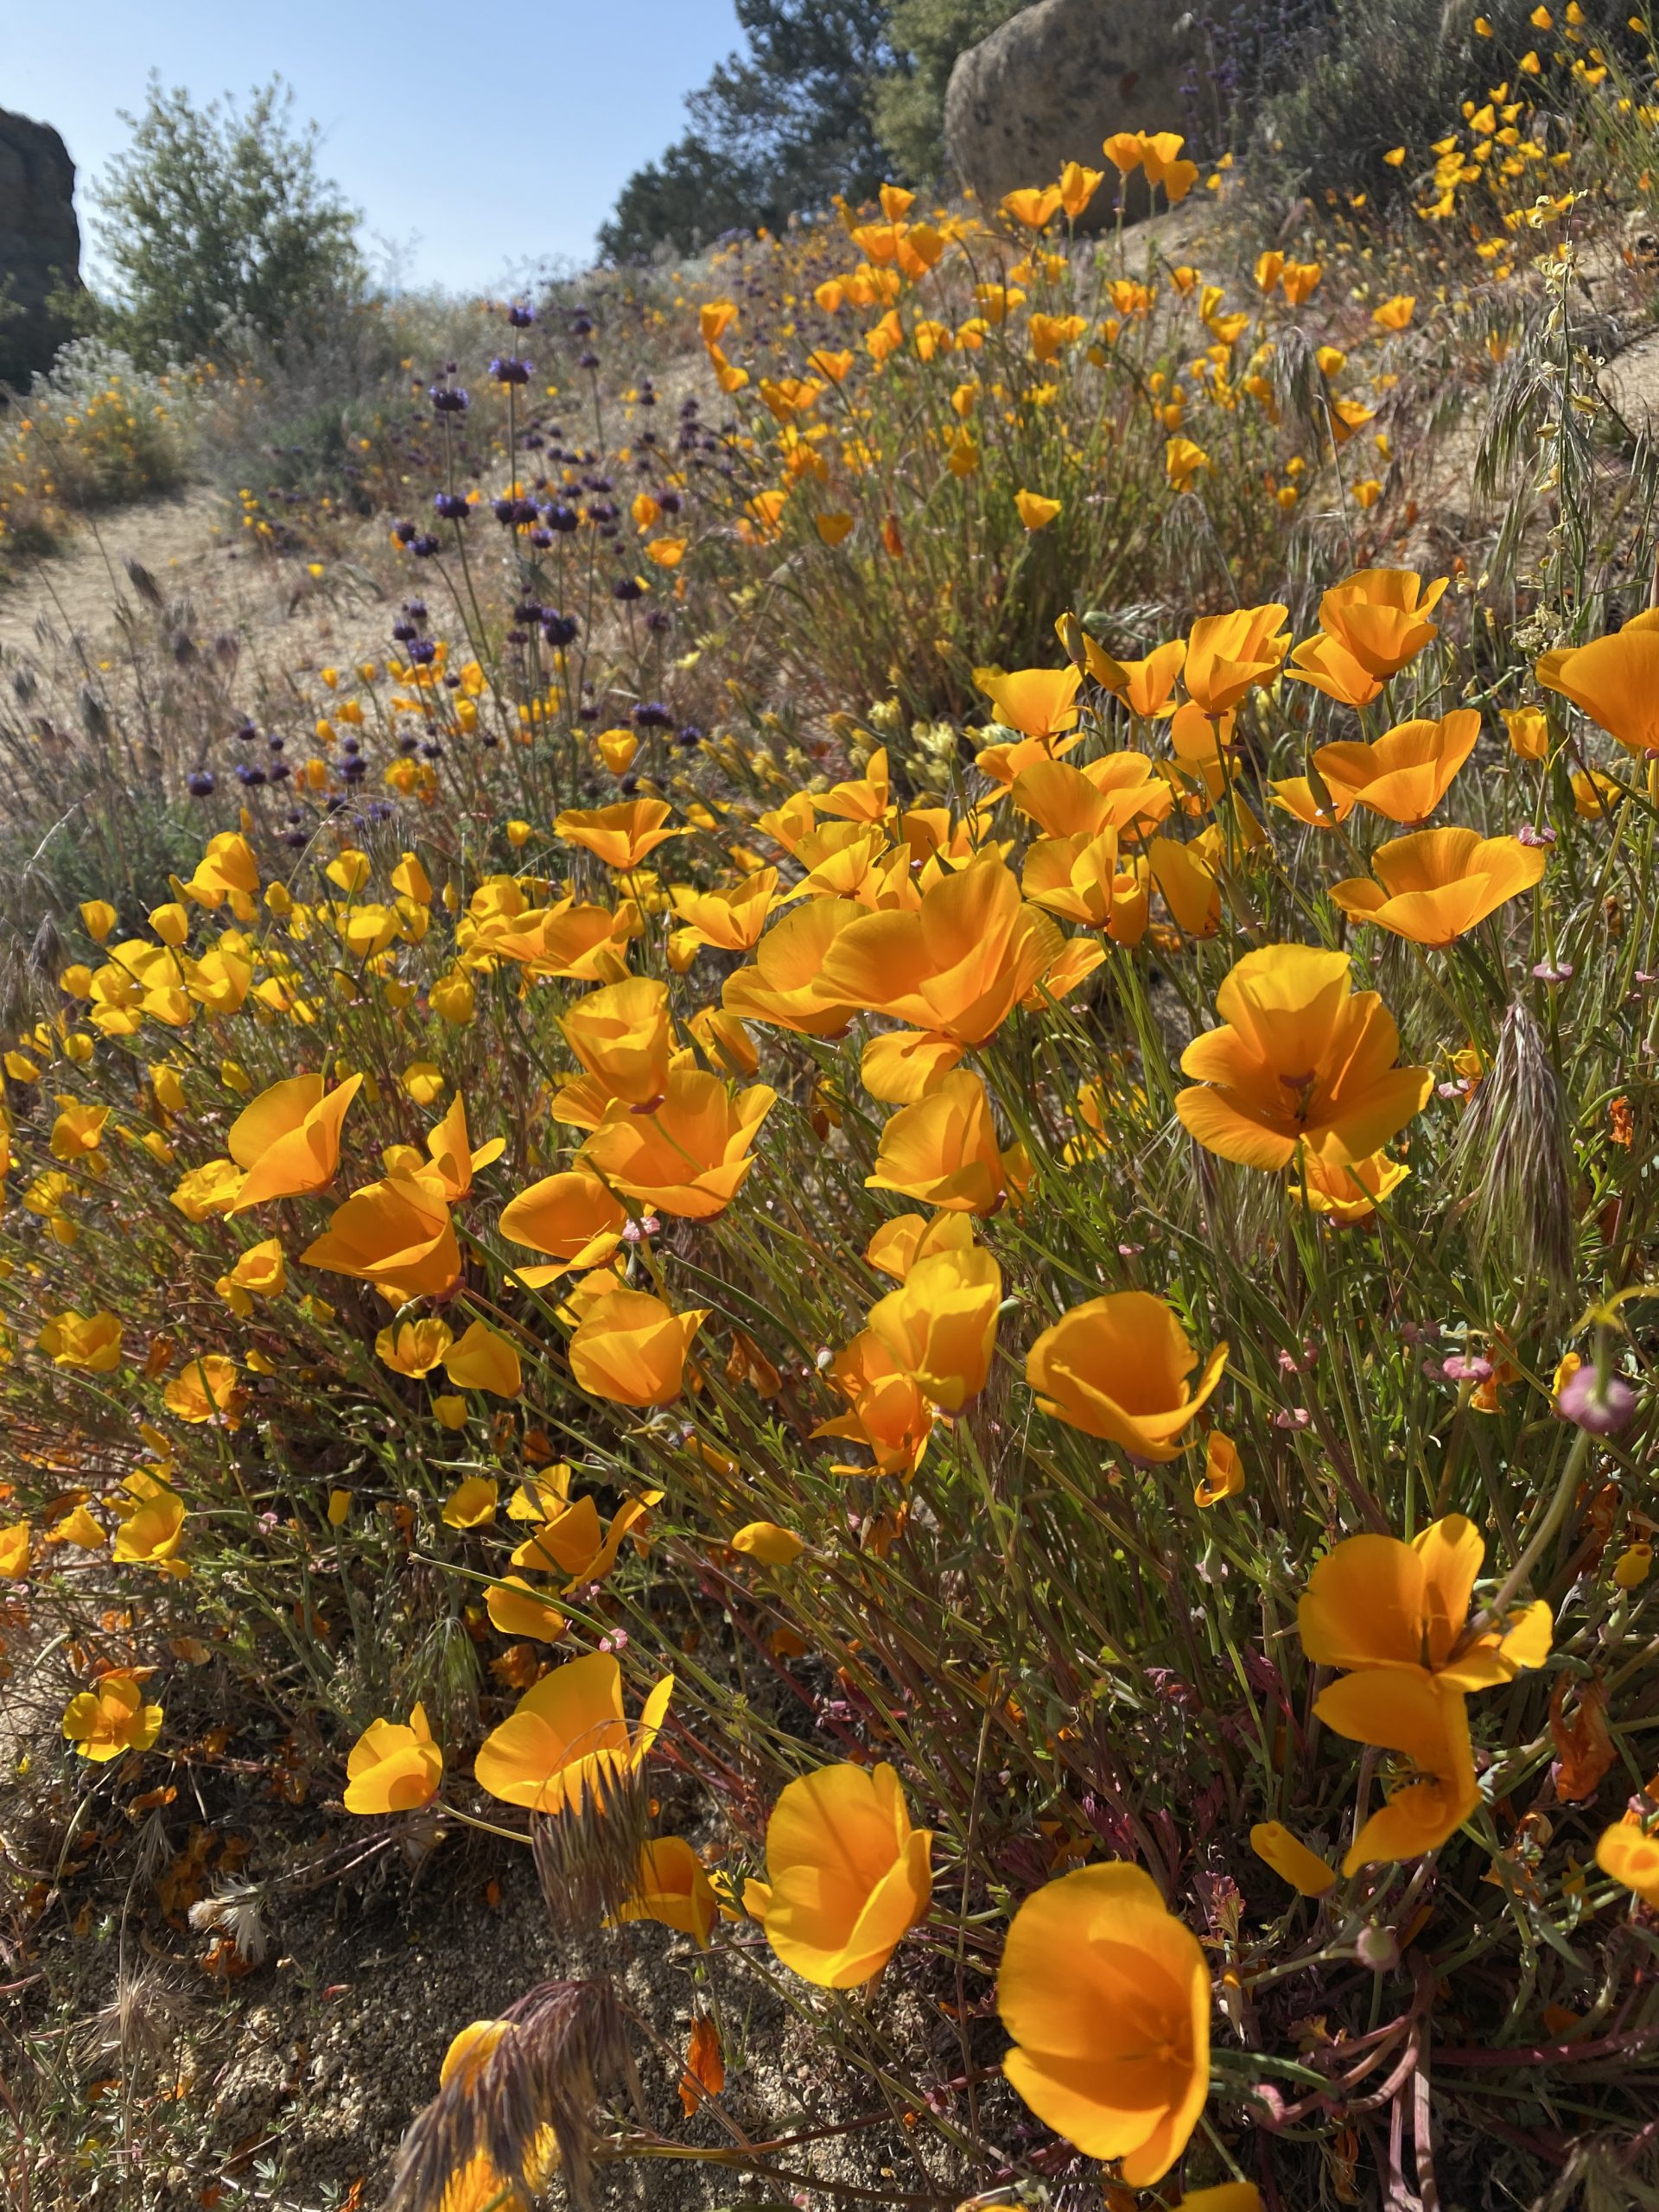 More california poppies on the PCT